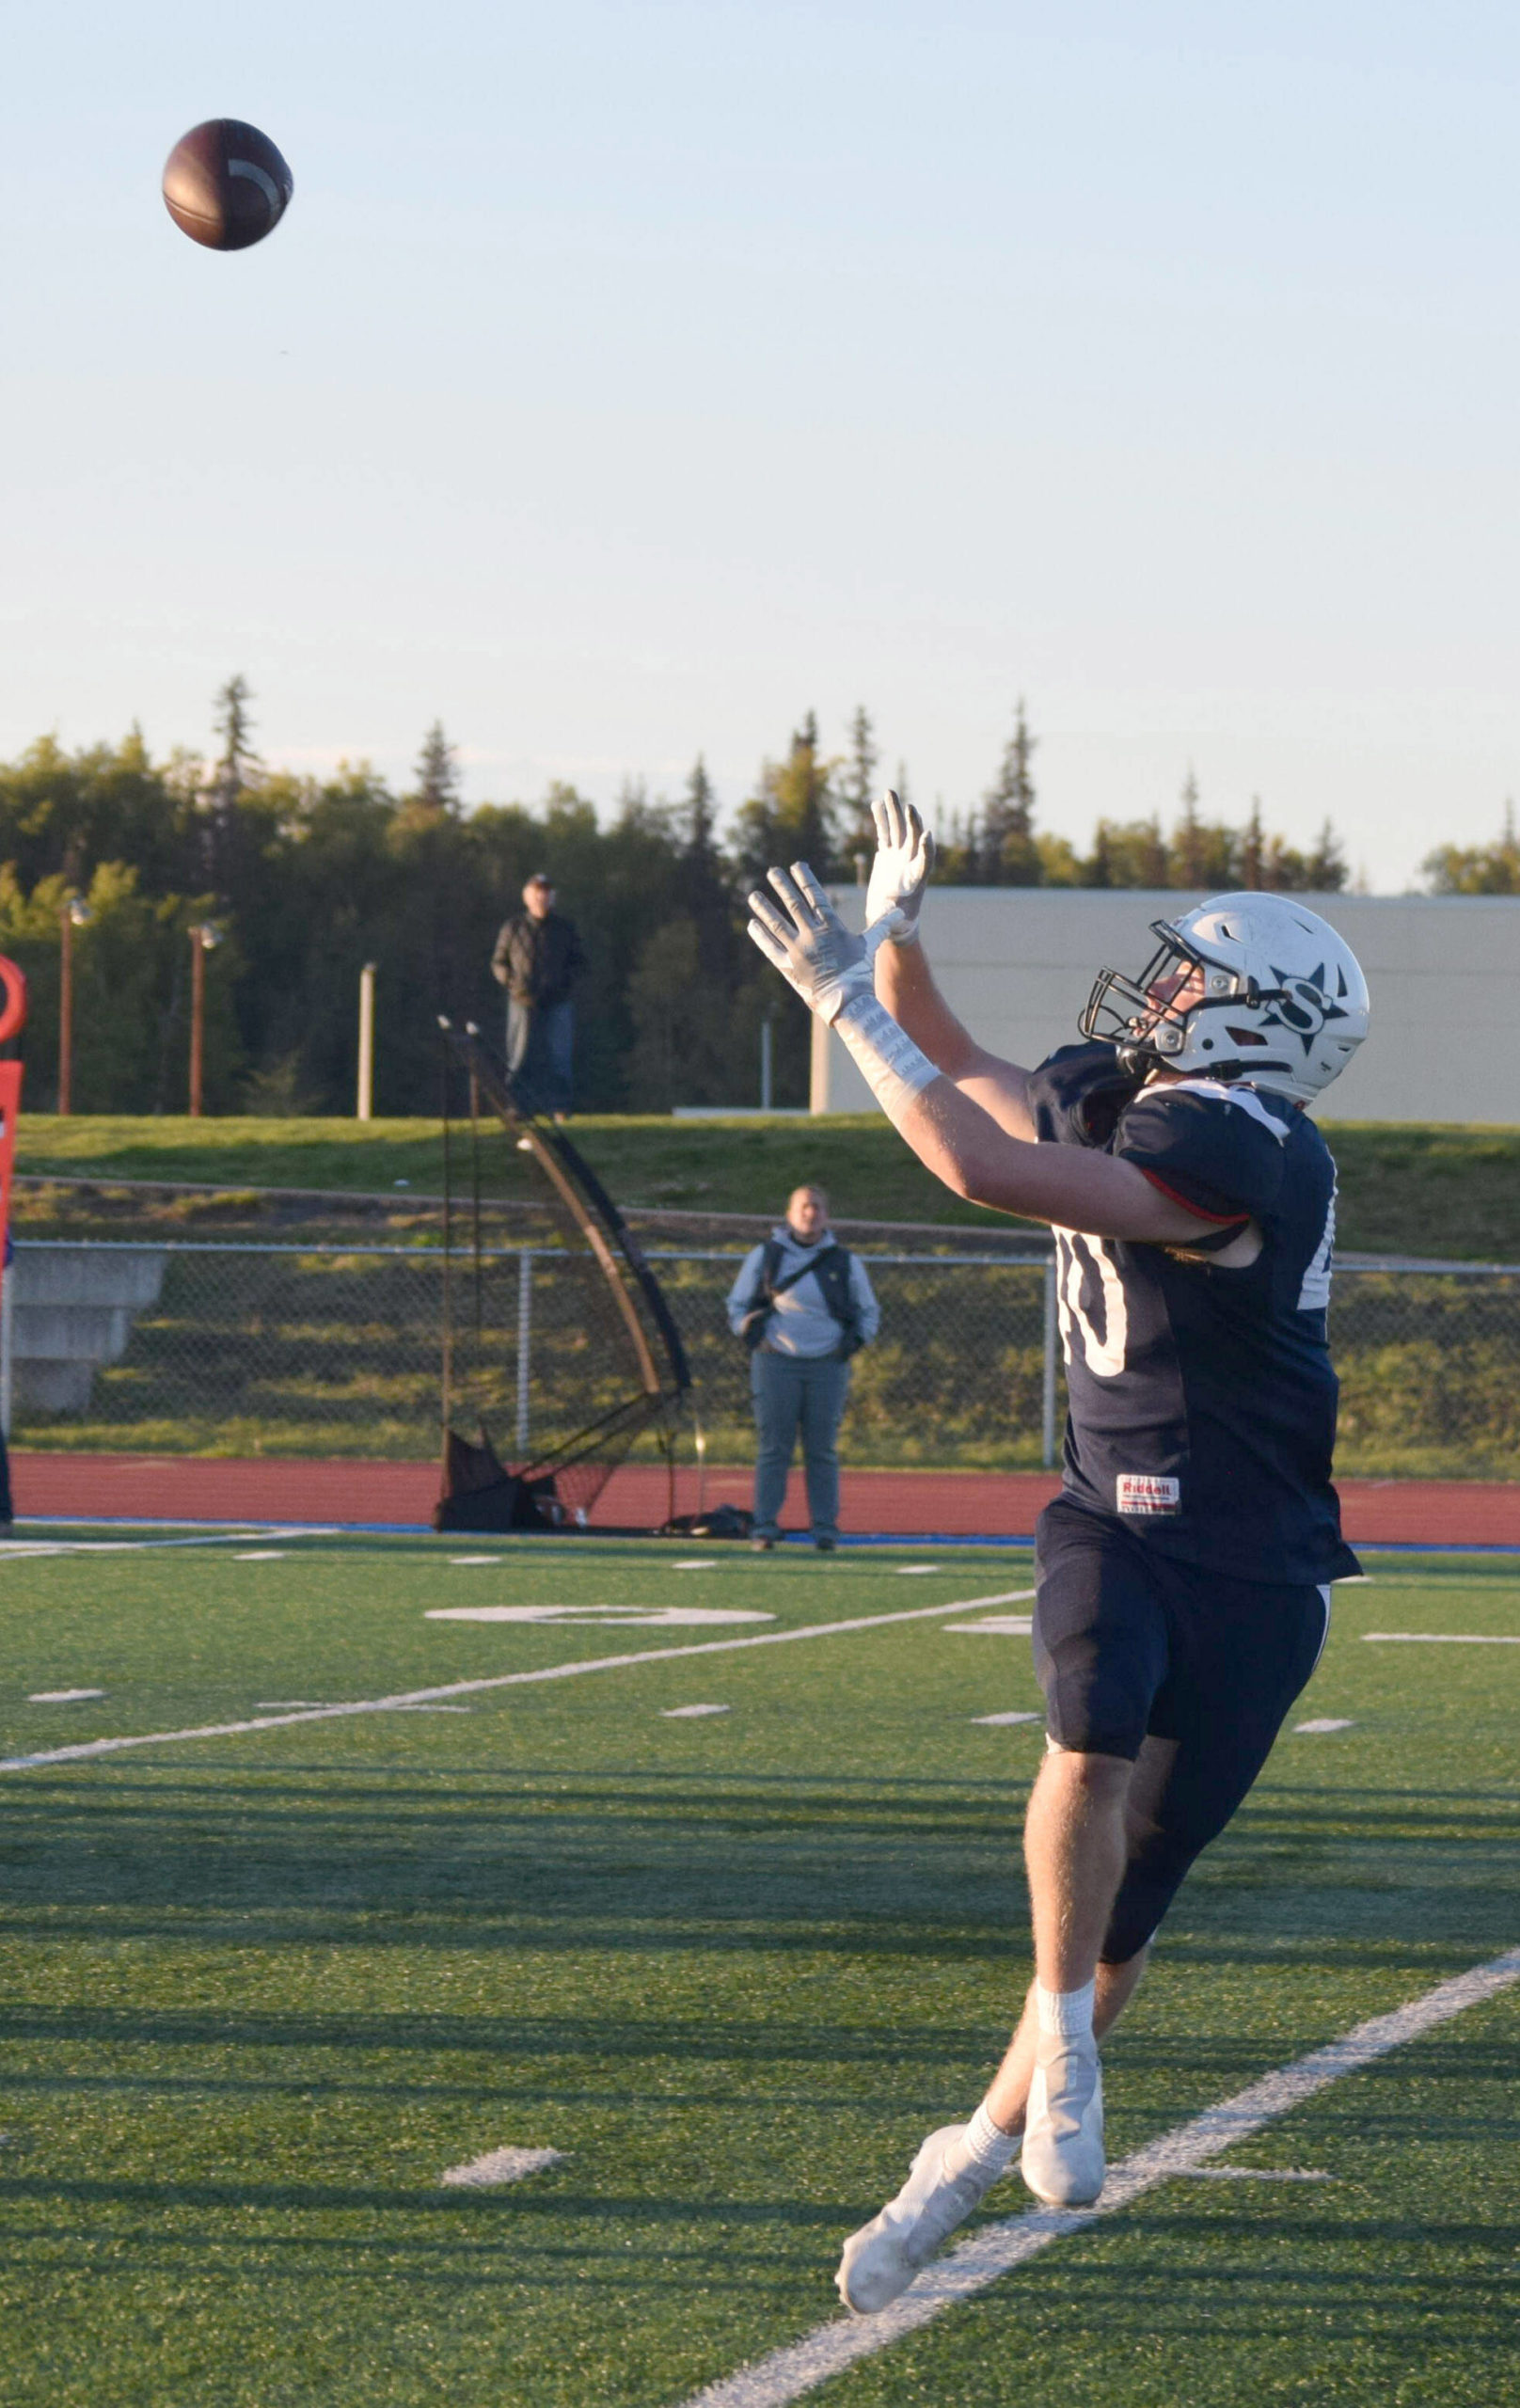 Dylan Dahlgren receives a long pass to score a touchdown during Soldotna High’s homecoming football game at Justin Maile Field in Soldotna, Alaska, on Friday, Sept. 10, 2021. (Camille Botello/Peninsula Clarion)